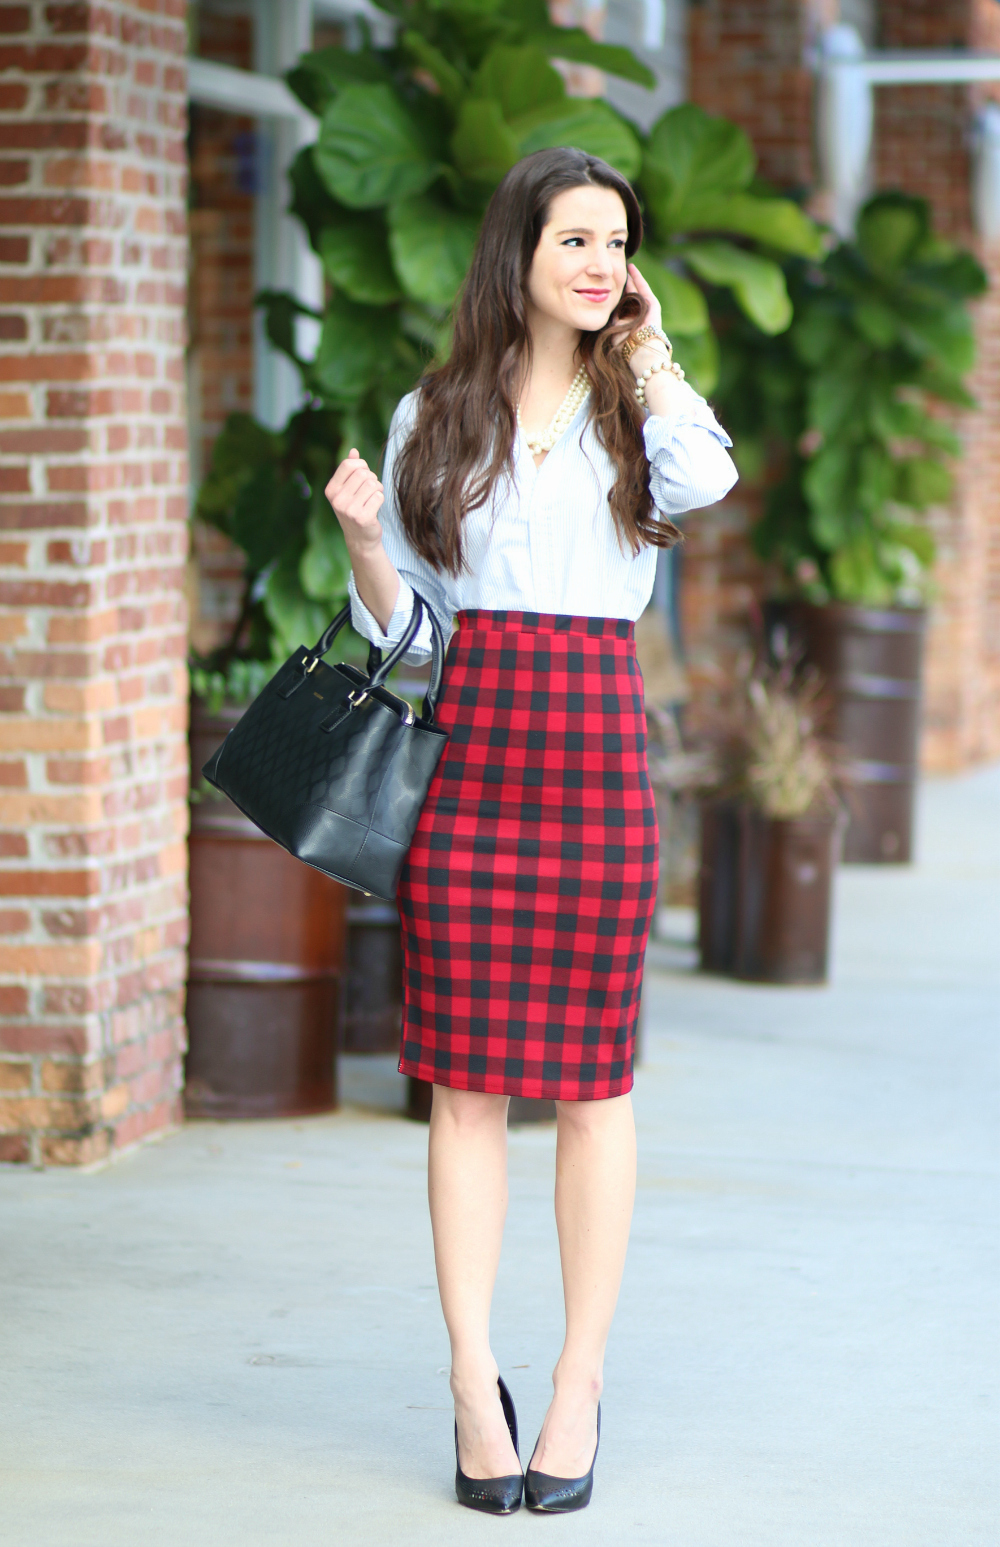 Red Plaid Pencil Skirt, Preppy Pencil Skirt, Plaid Pencil Skirt, St. Ives Oatmeal, St. Ives Radiance Boost Bowl, St. Ives Nourish & Soothe Oatmeal & Shea Butter Body Lotion, St. Ives Nourished & Smooth Oatmeal Body Scrub,